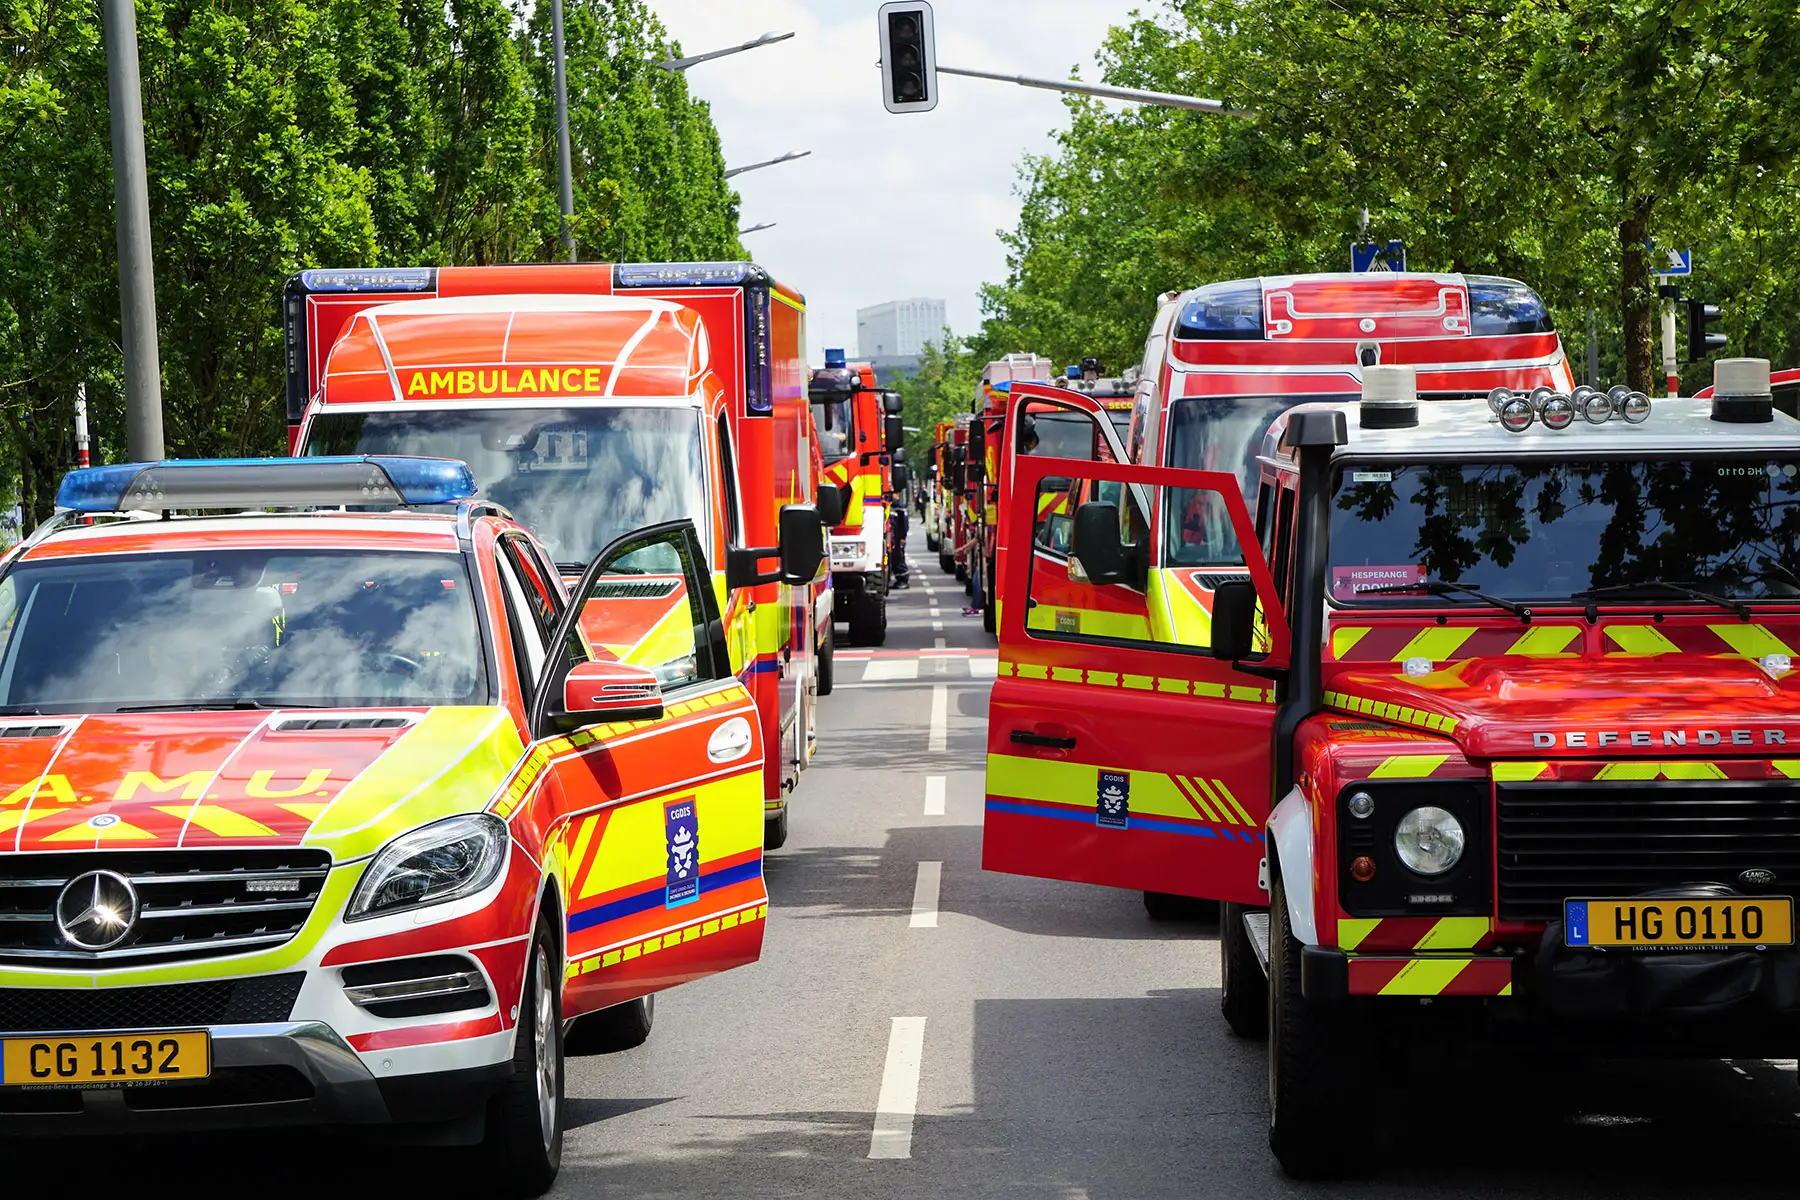 A fleet of ambulances are parked side-by-side down a street in Luxembourg